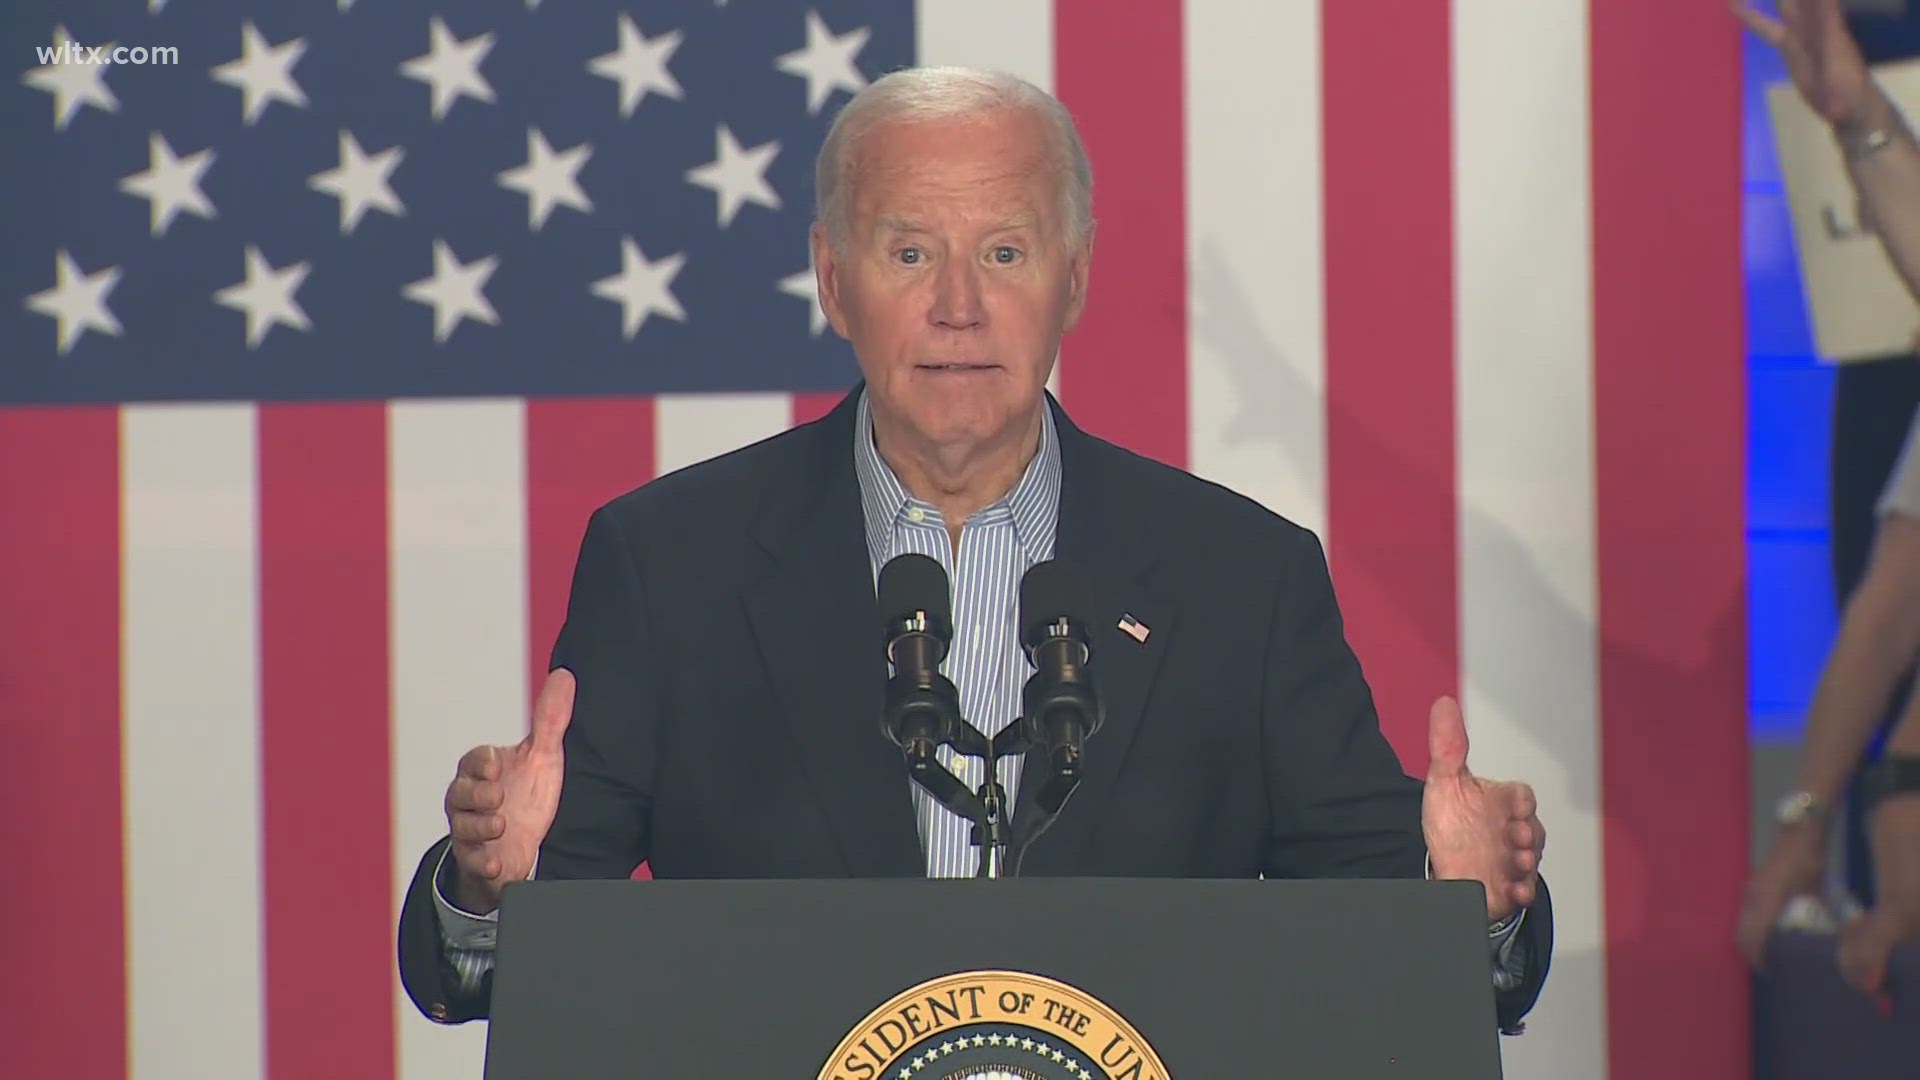 President Biden sat down with ABC News' George Stephanopoulos in Wisconsin Friday for the first interview since his disastrous presidential debate last week.